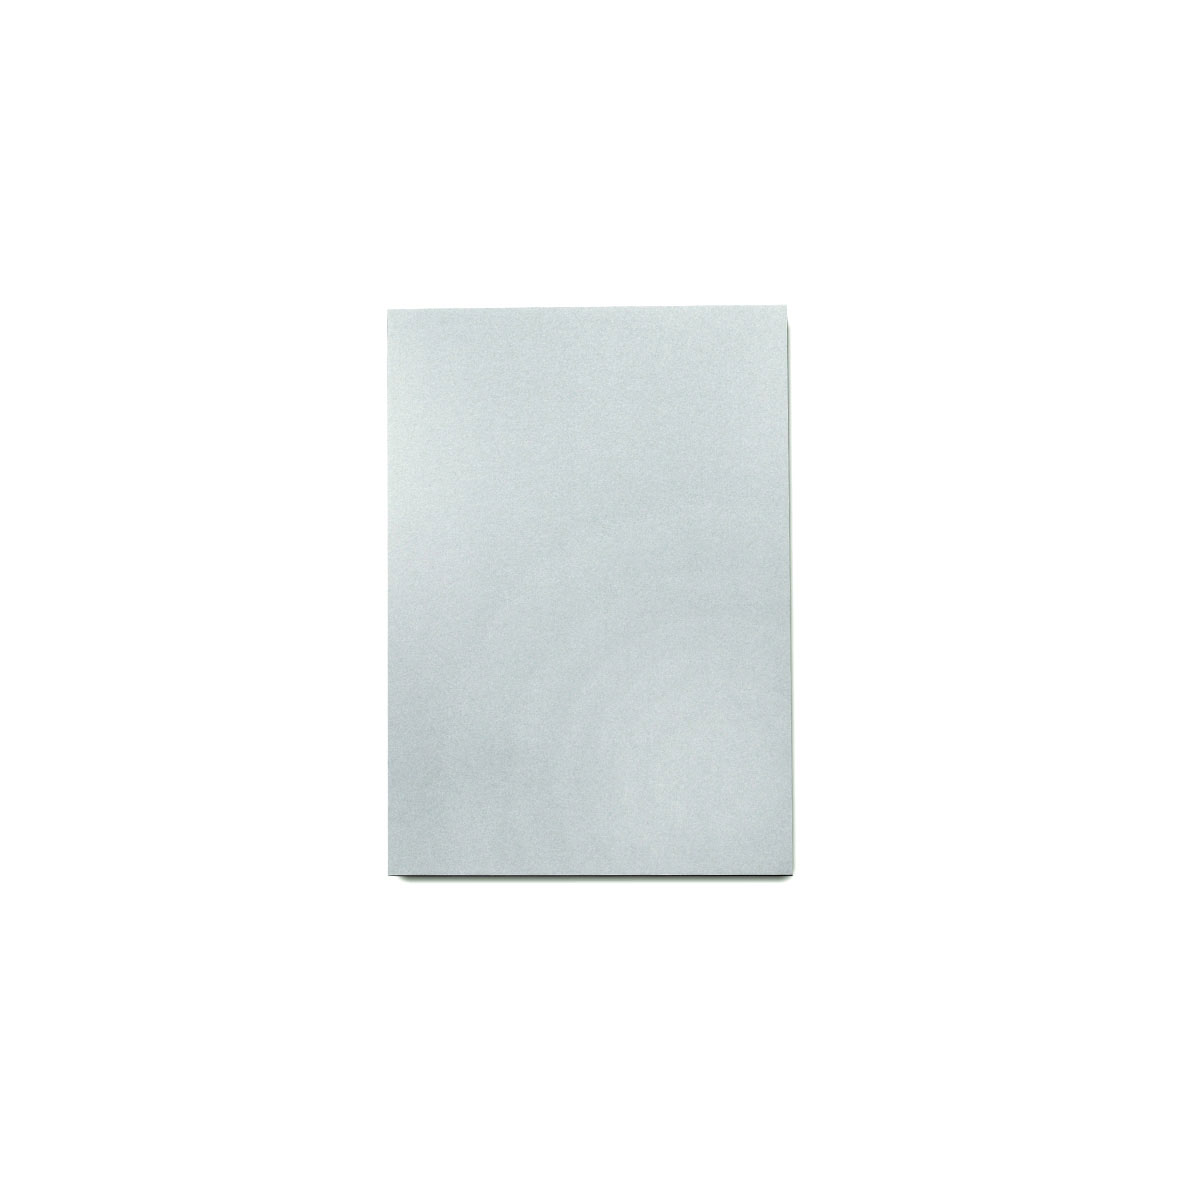 A4 Silver Shimmer 125gsm paper